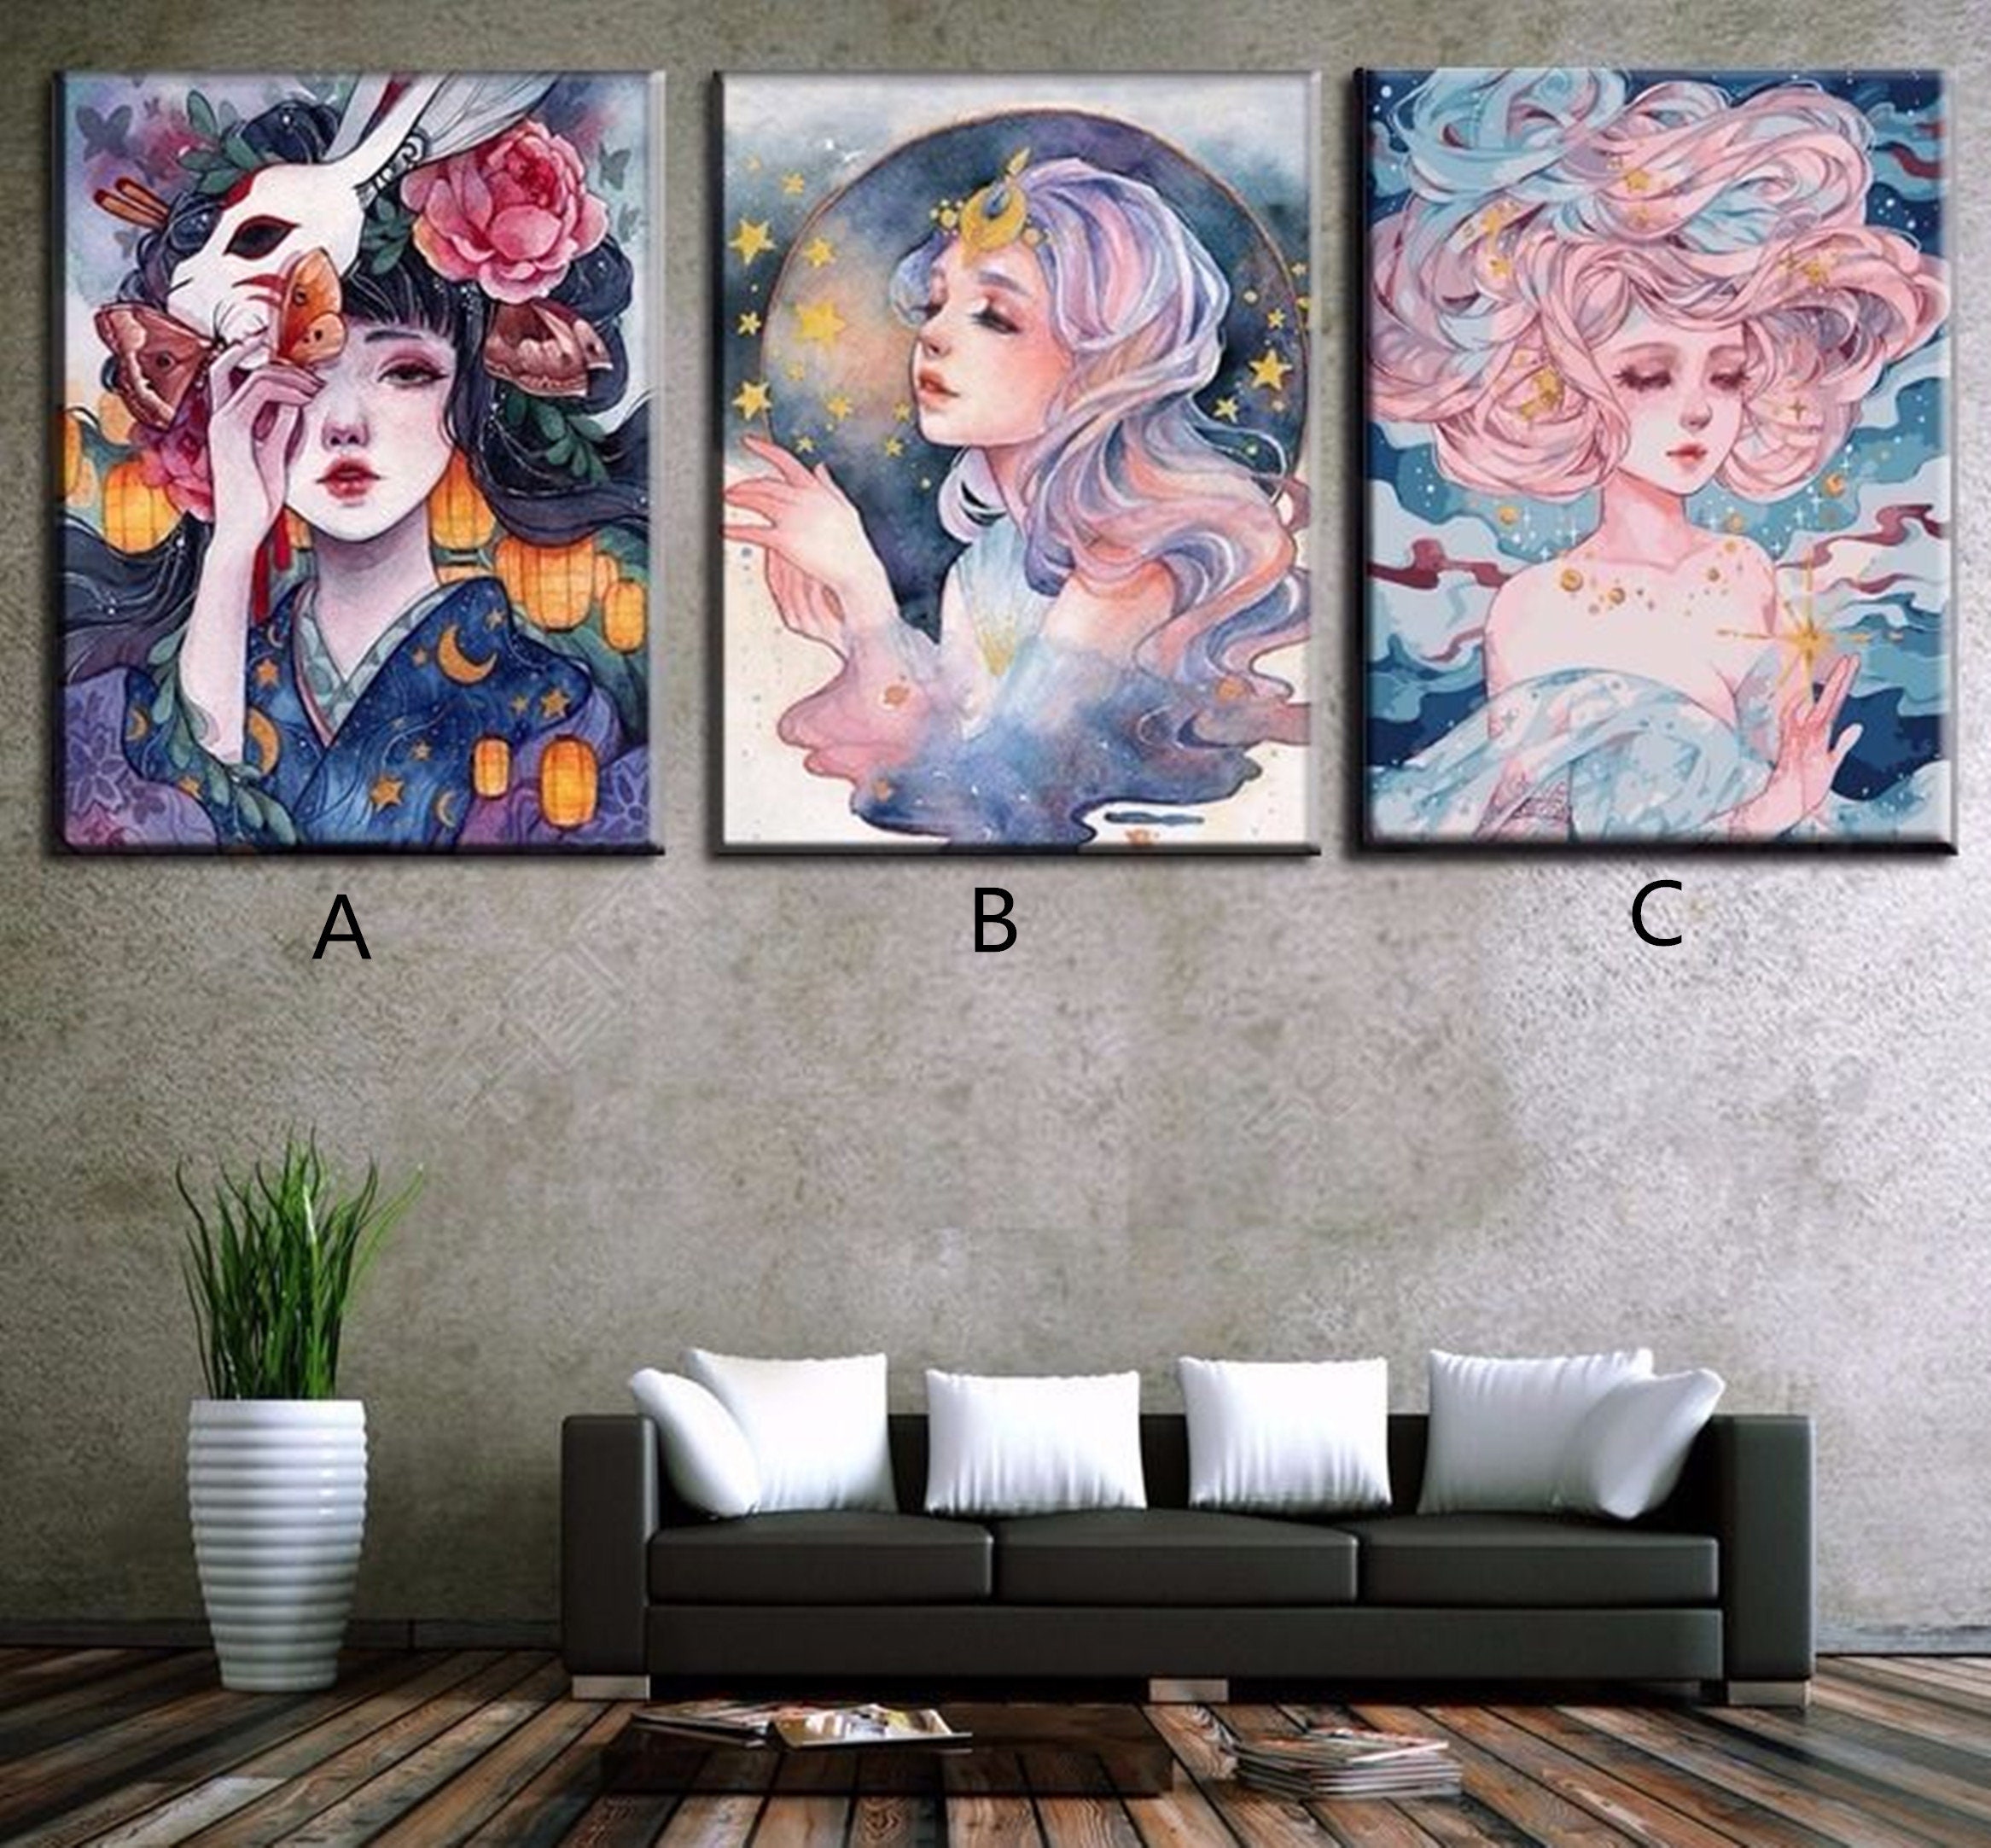 Canvas Wall Art Home Decoration 40X50Cm/15.80X 19.70 inch Without Framed TARIZPPG Paint by Numbers Kits for Adults And Kids DIY Oil Painting Digital Anime Girl And Dandelion 